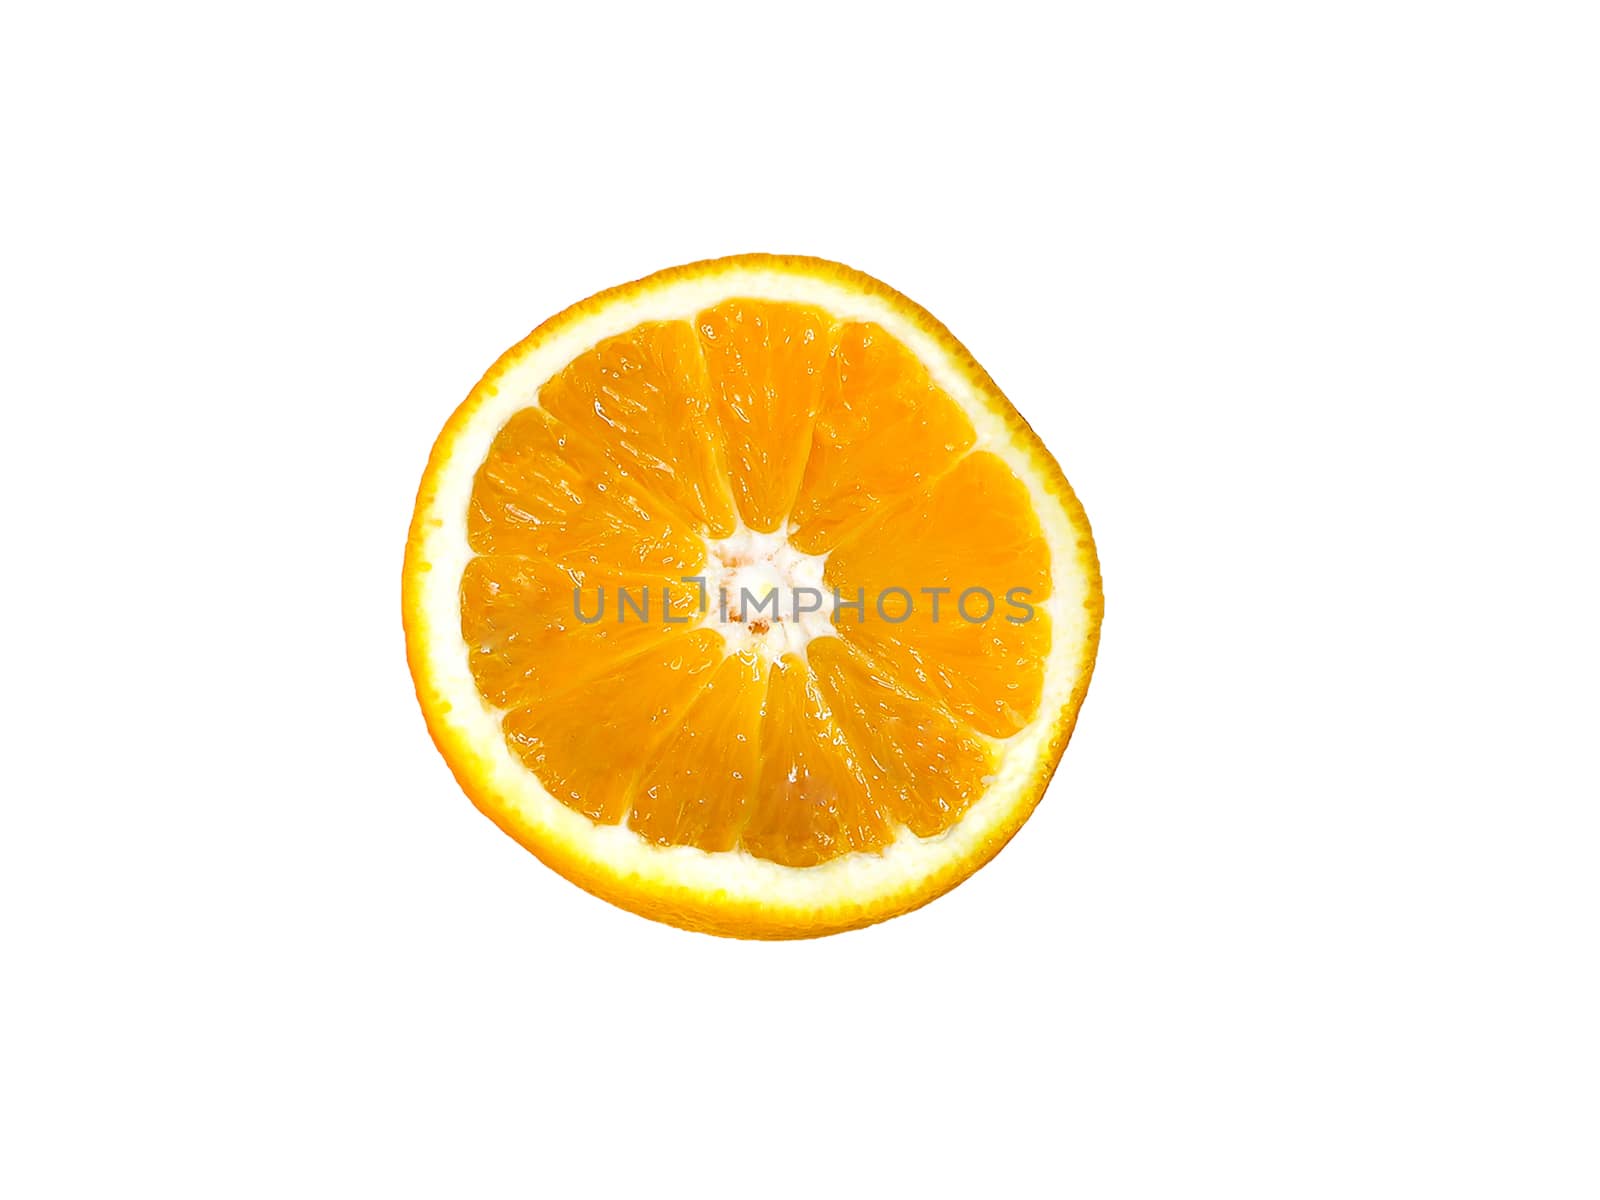 a slice of sliced navel orange, top view, isolated on white background